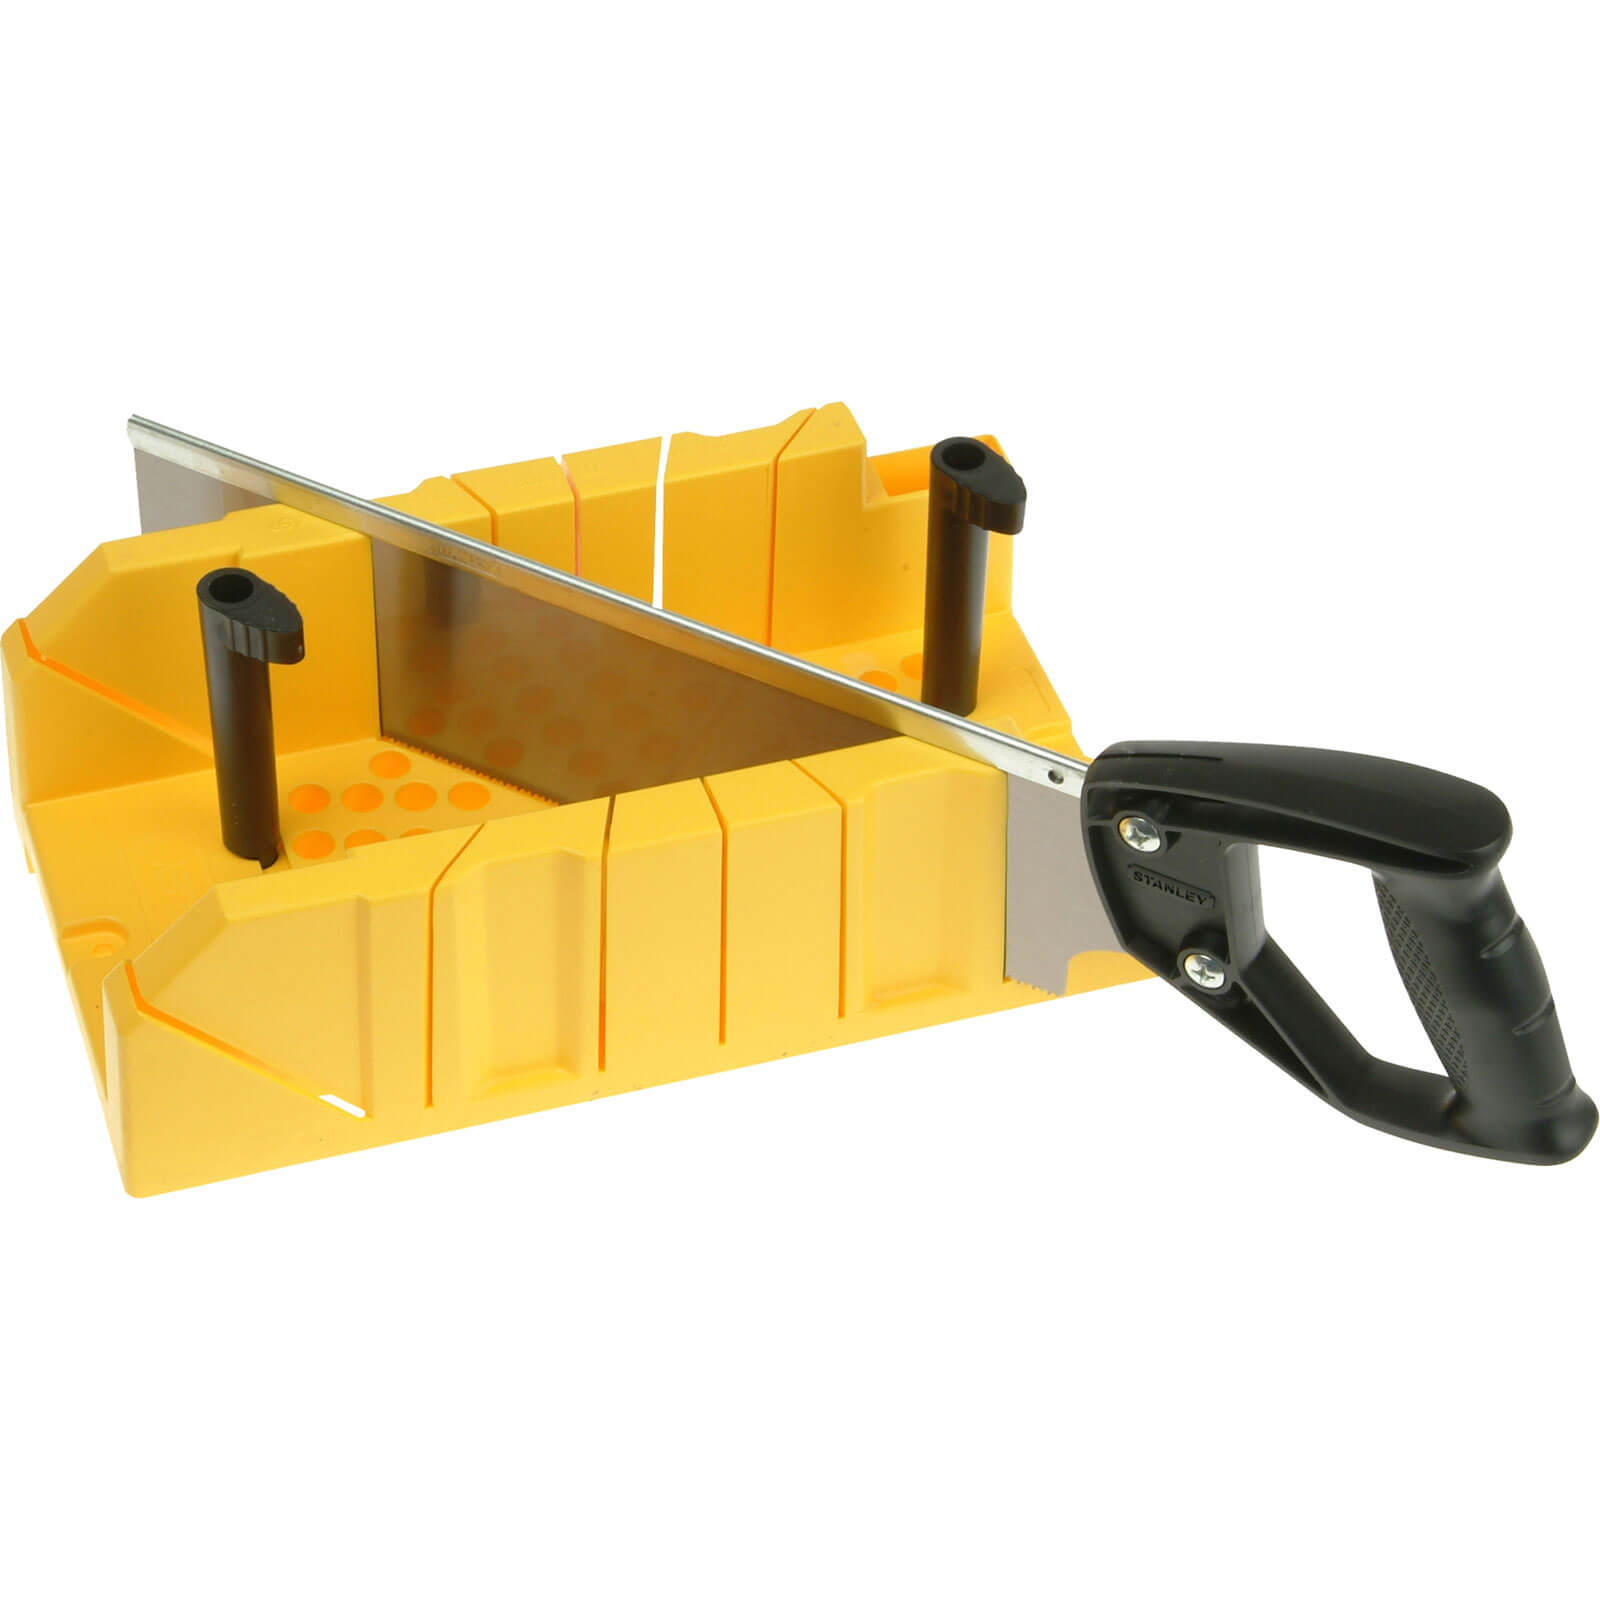 Image of Stanley Clamping Mitre Box and Tenon Saw 310mm